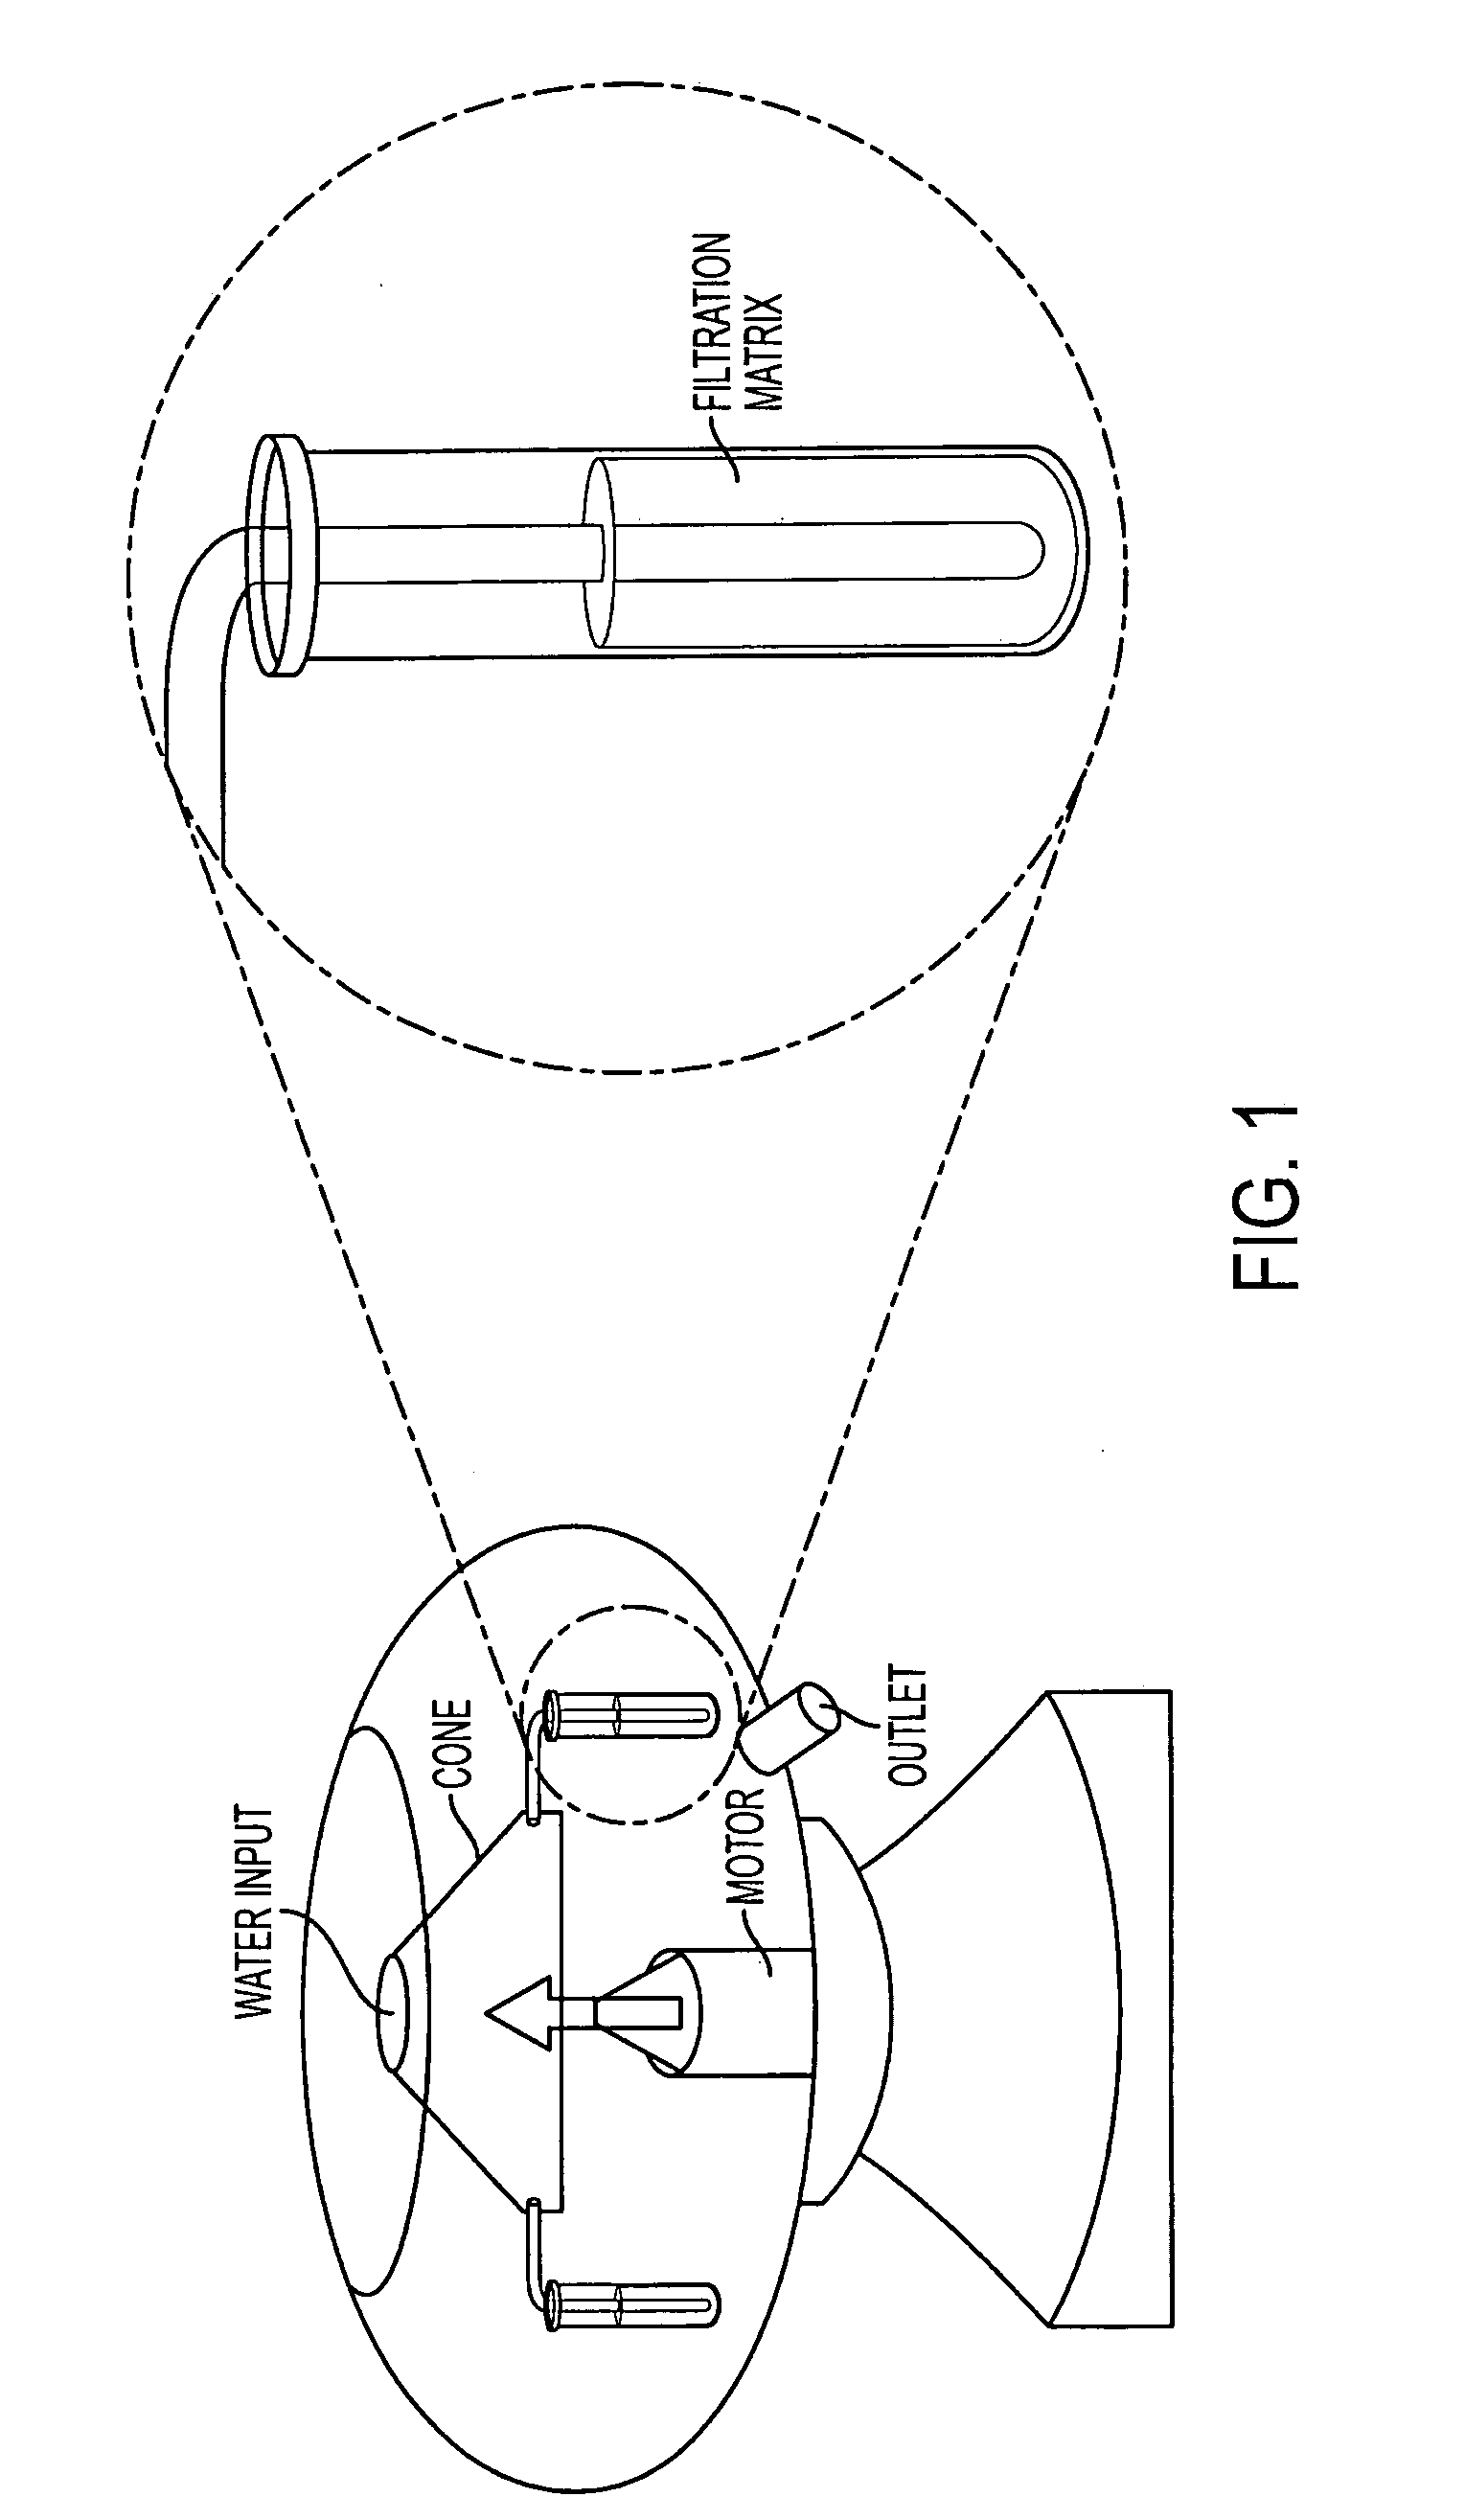 Apparatus for the separation of cystic parasite forms from water